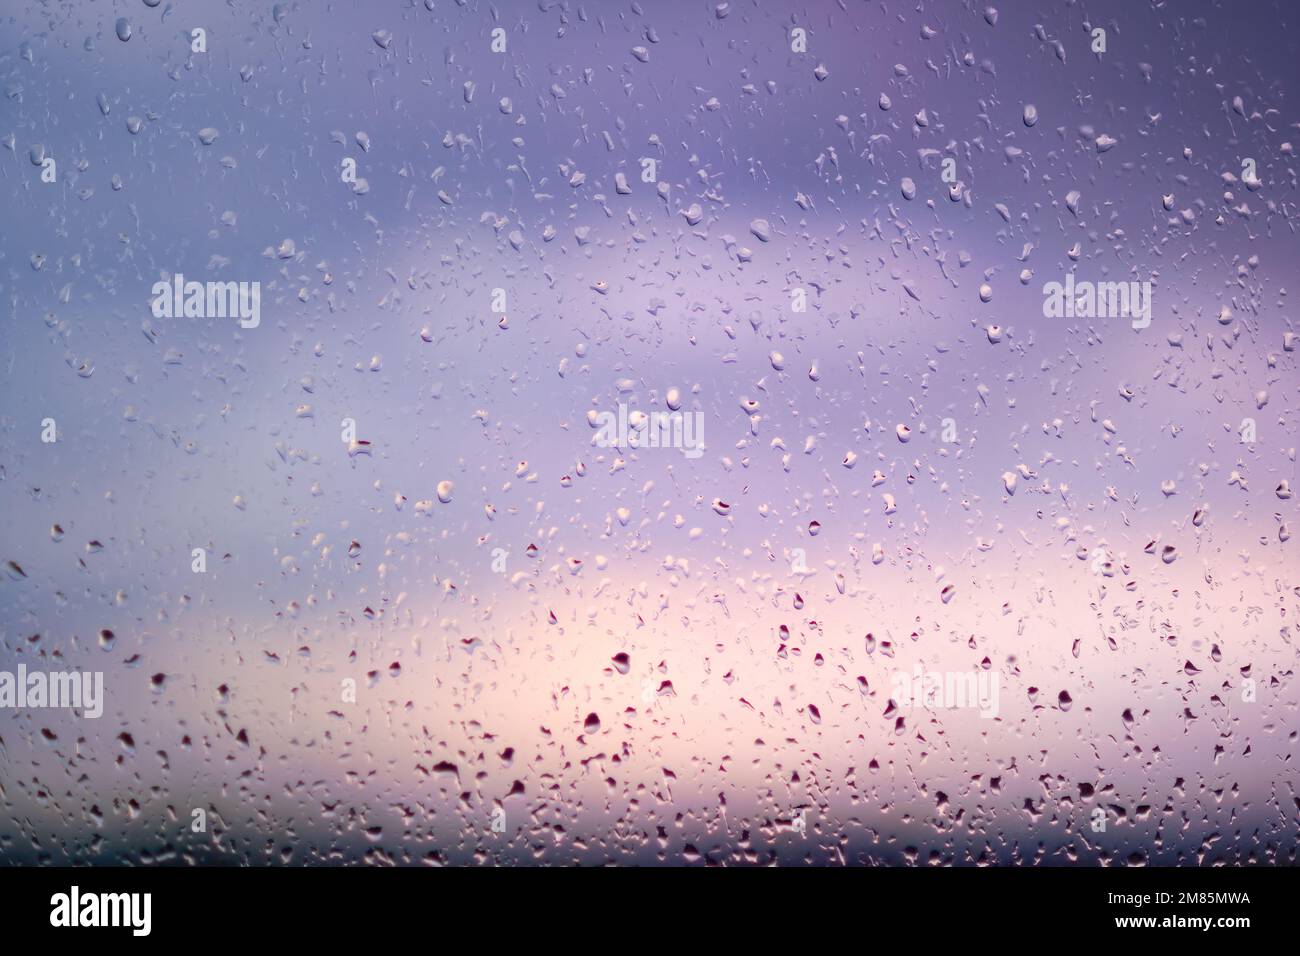 Natural water drops on a window agains a sunset sky. Stock Photo